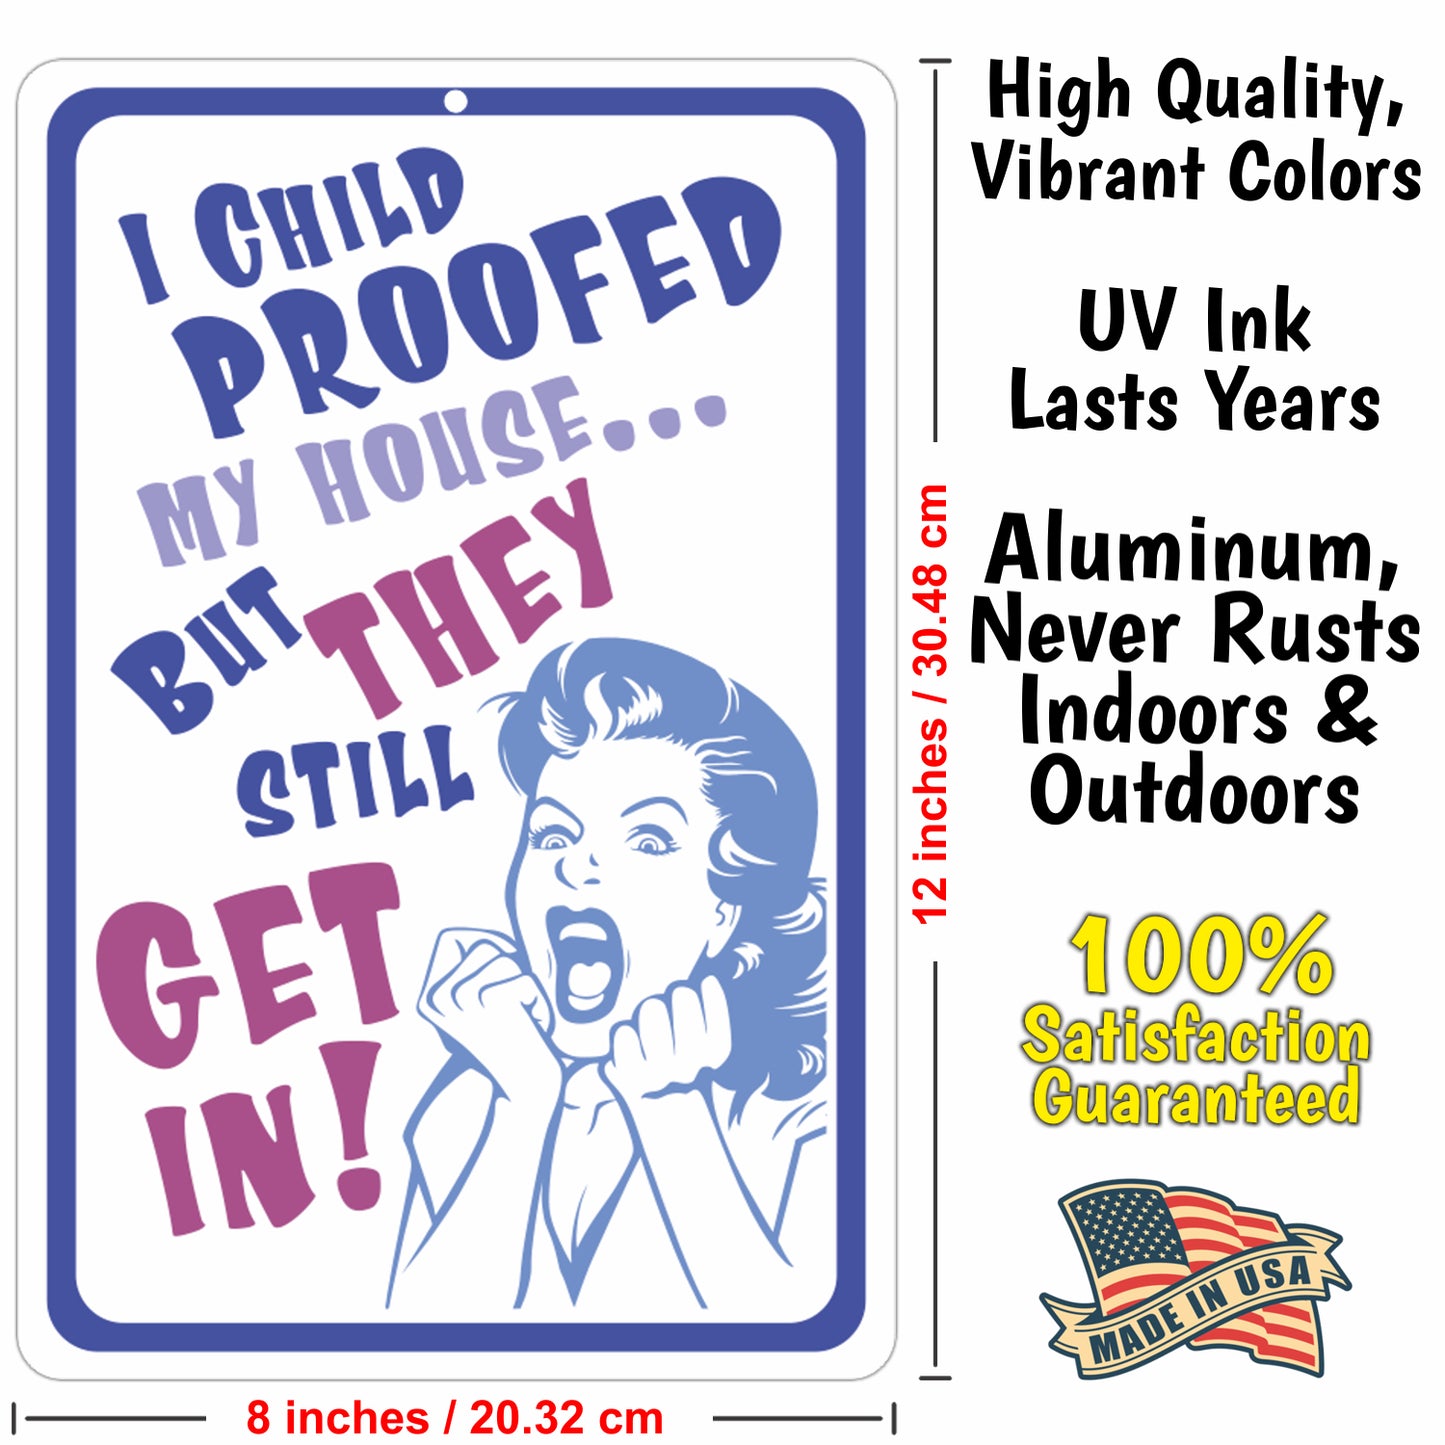 Funny Metal Sign - I Child Proofed My House. but They Still get in! - Size 8 x 12